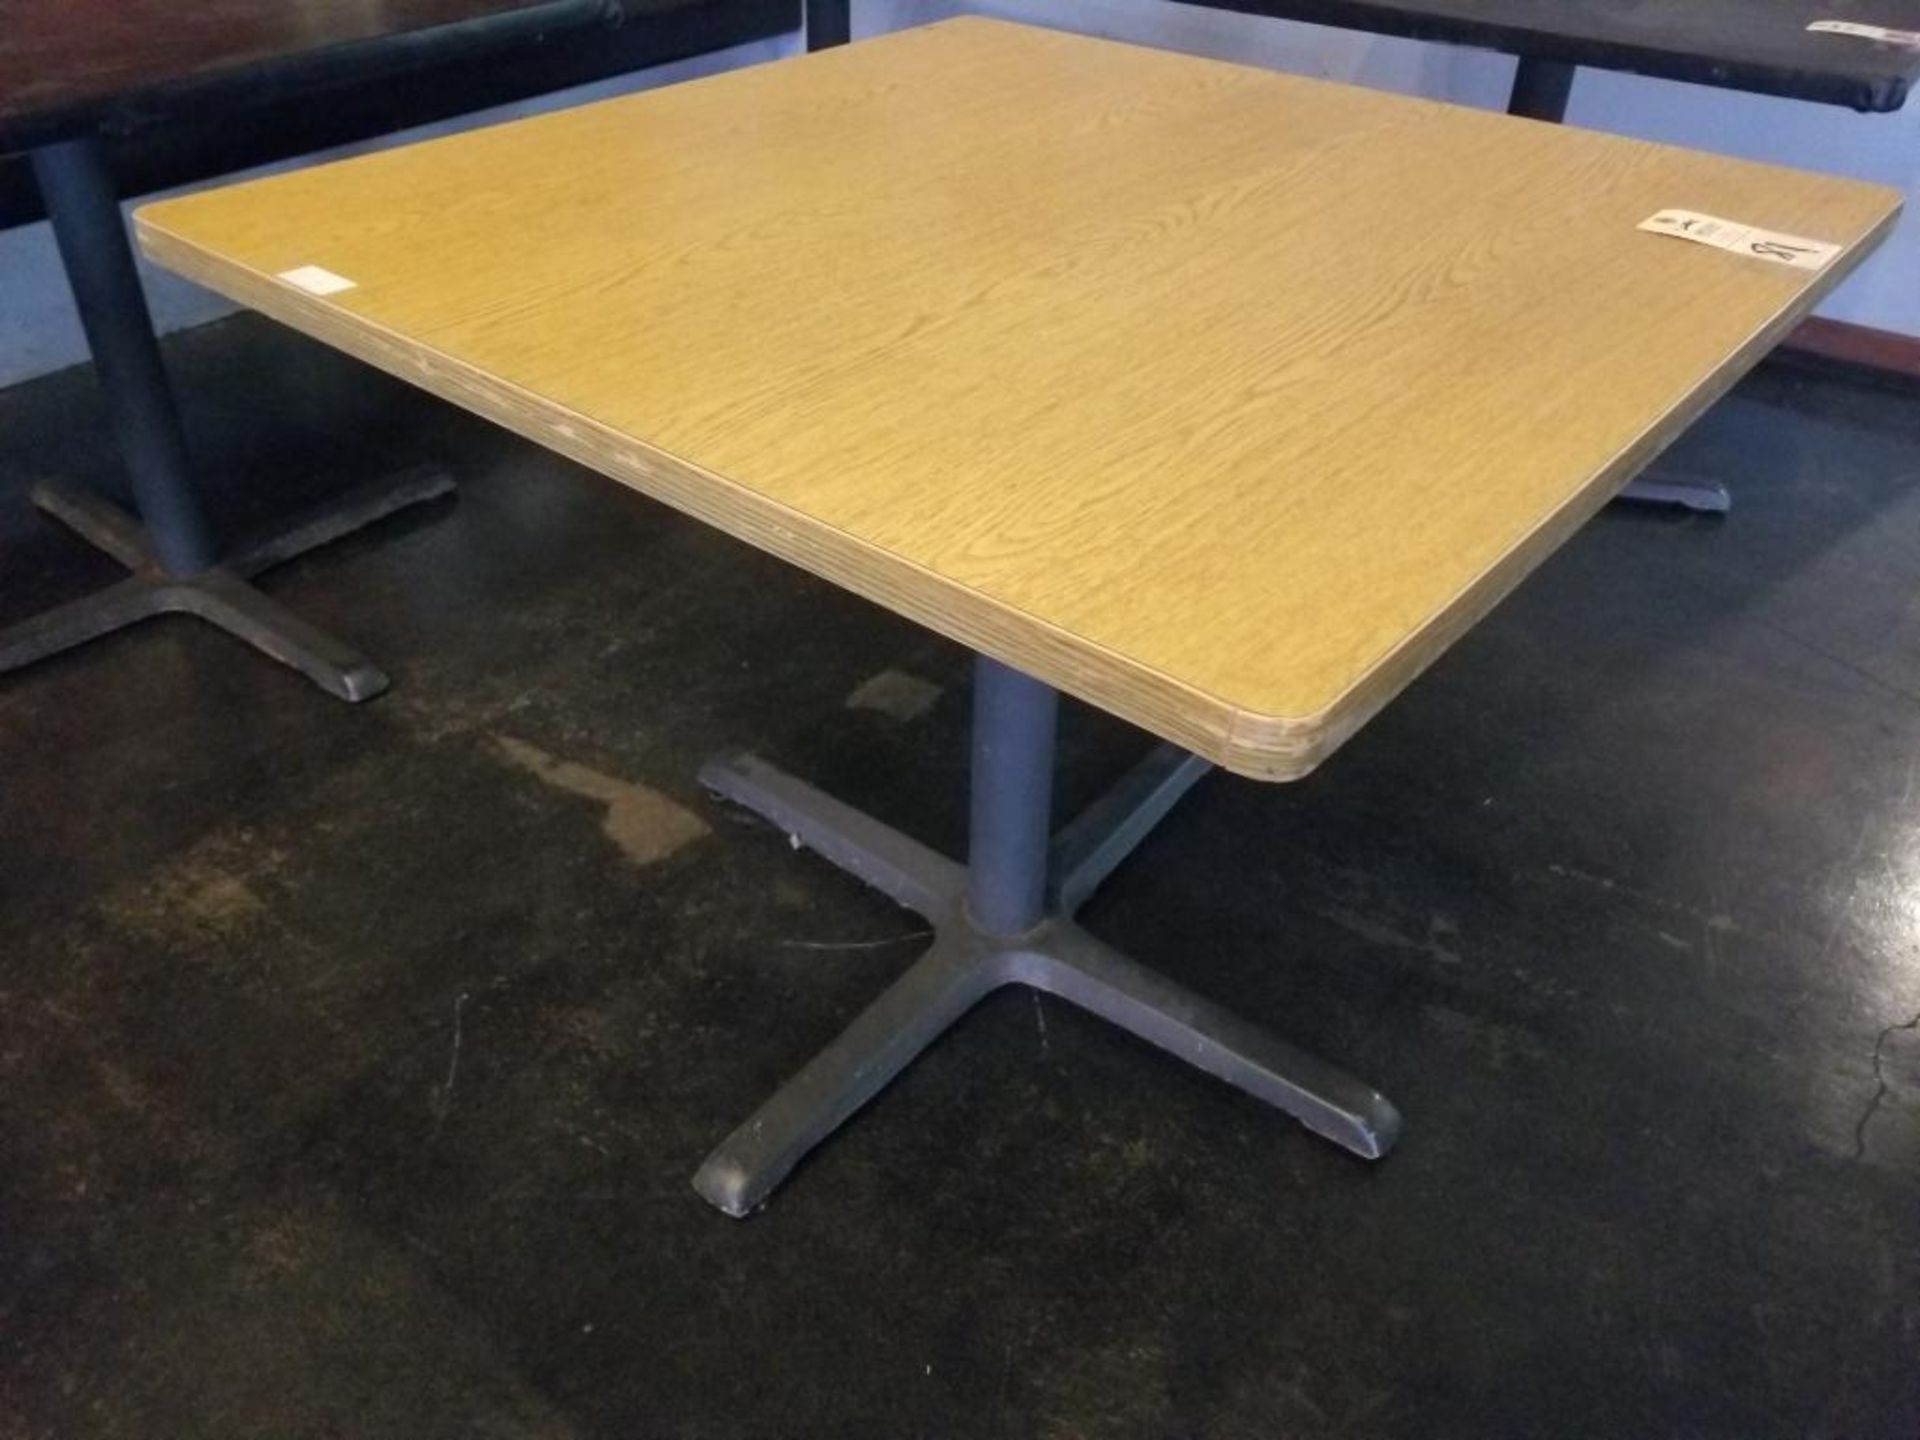 36in x 36in table with 4 chairs. - Image 2 of 4